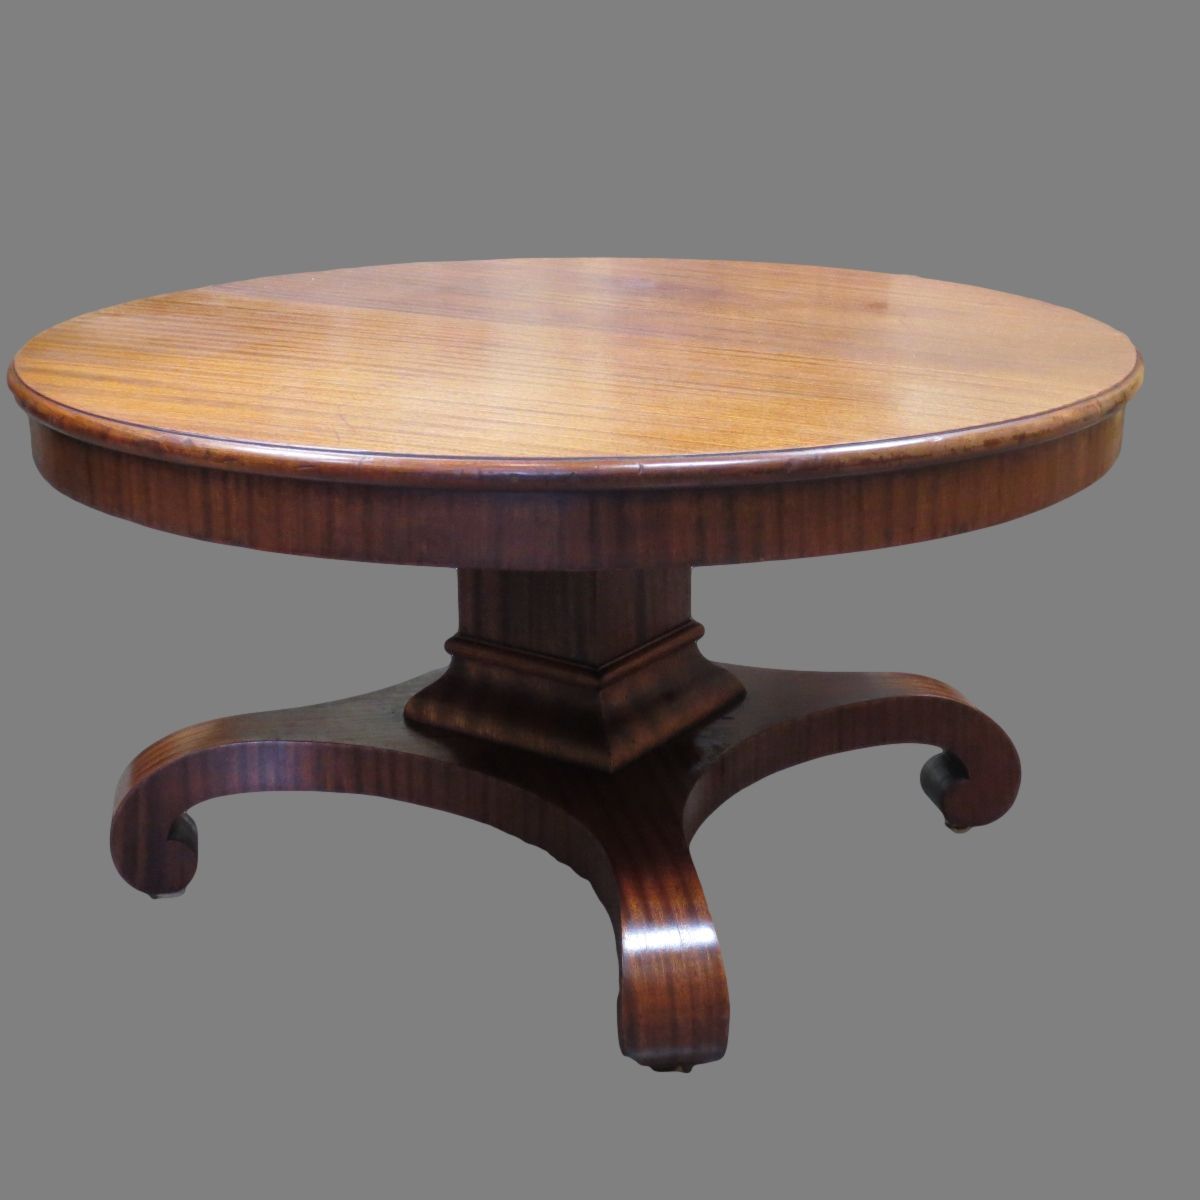 Antique Coffee Tables, Antique Furniture, Antique Coffeetables, Antique Inside American Heritage Round Coffee Tables (Gallery 7 of 20)